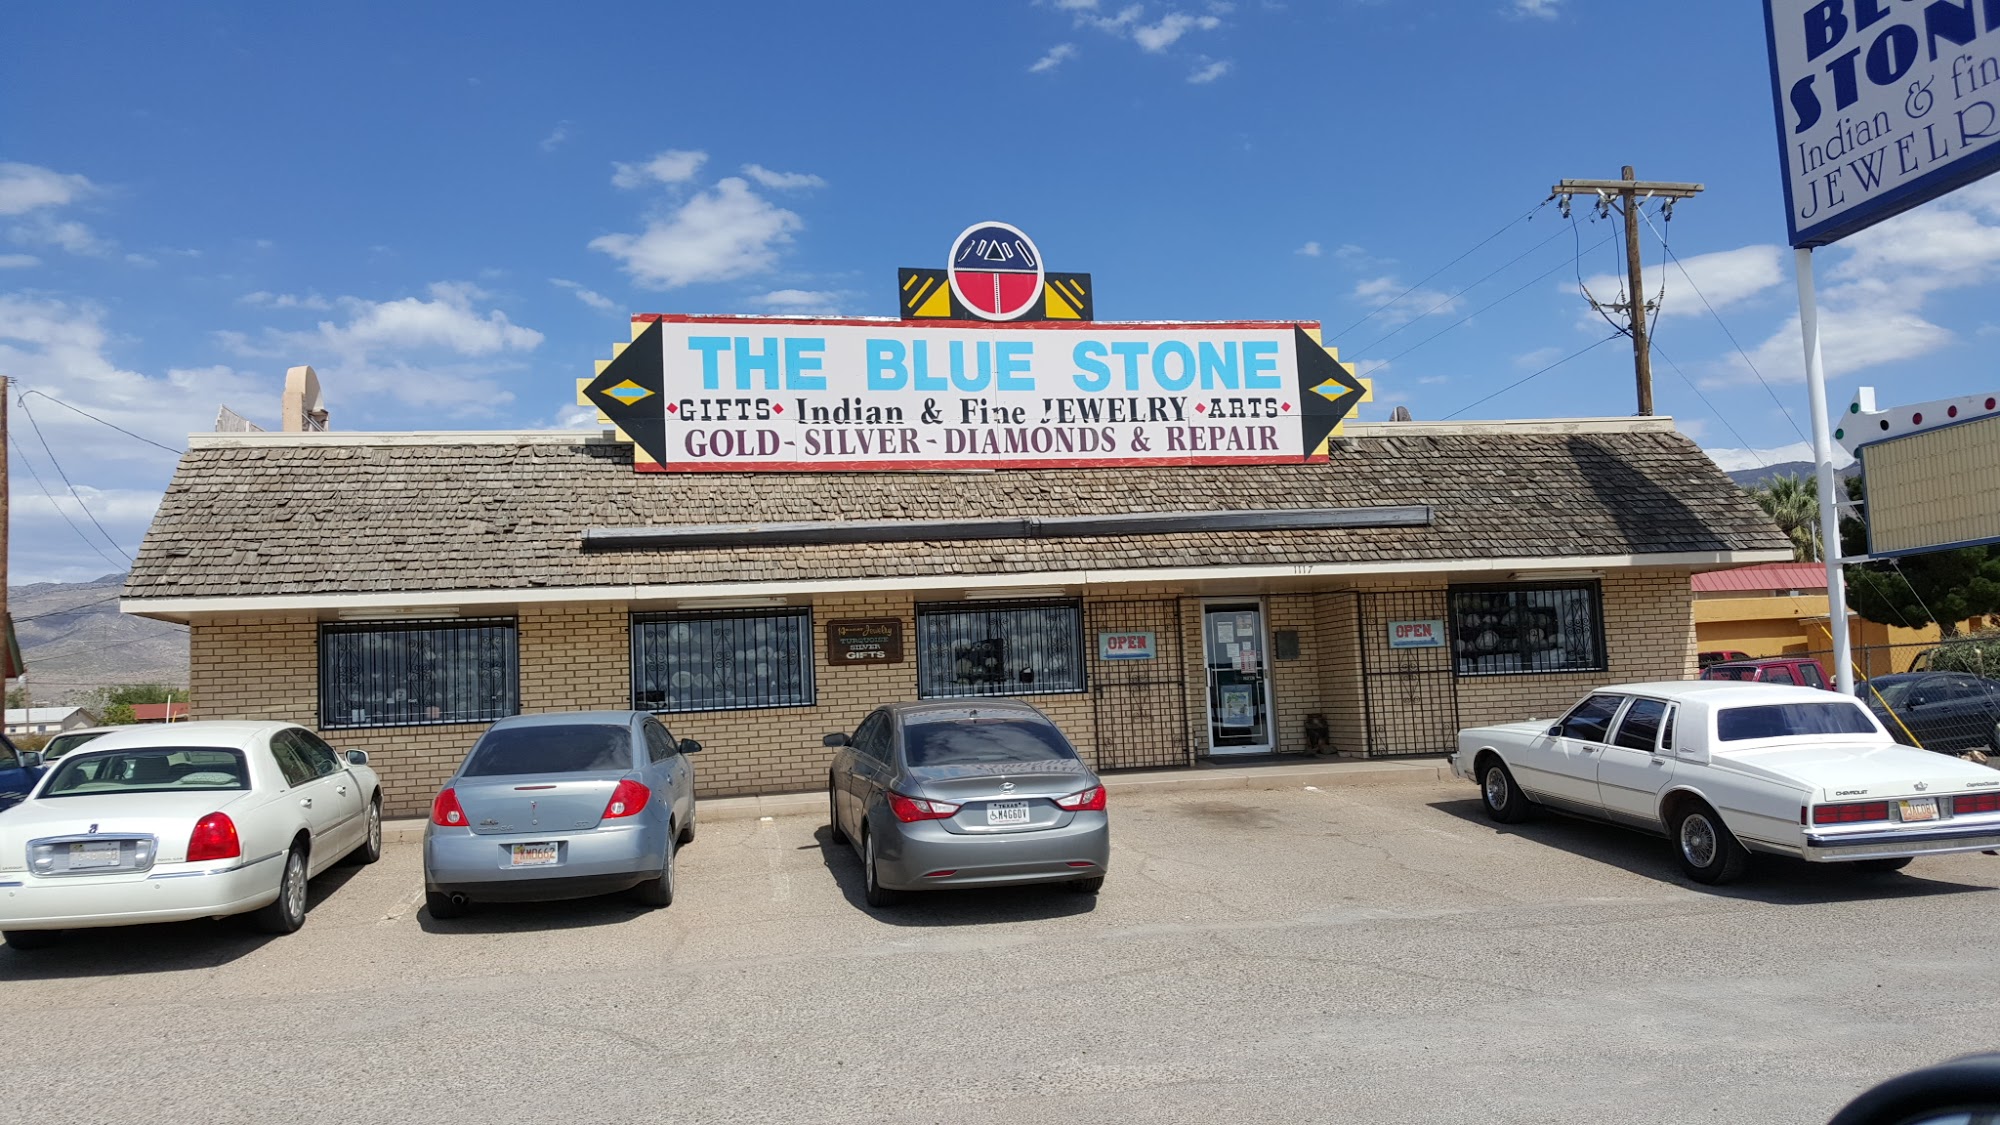 The Blue Stone